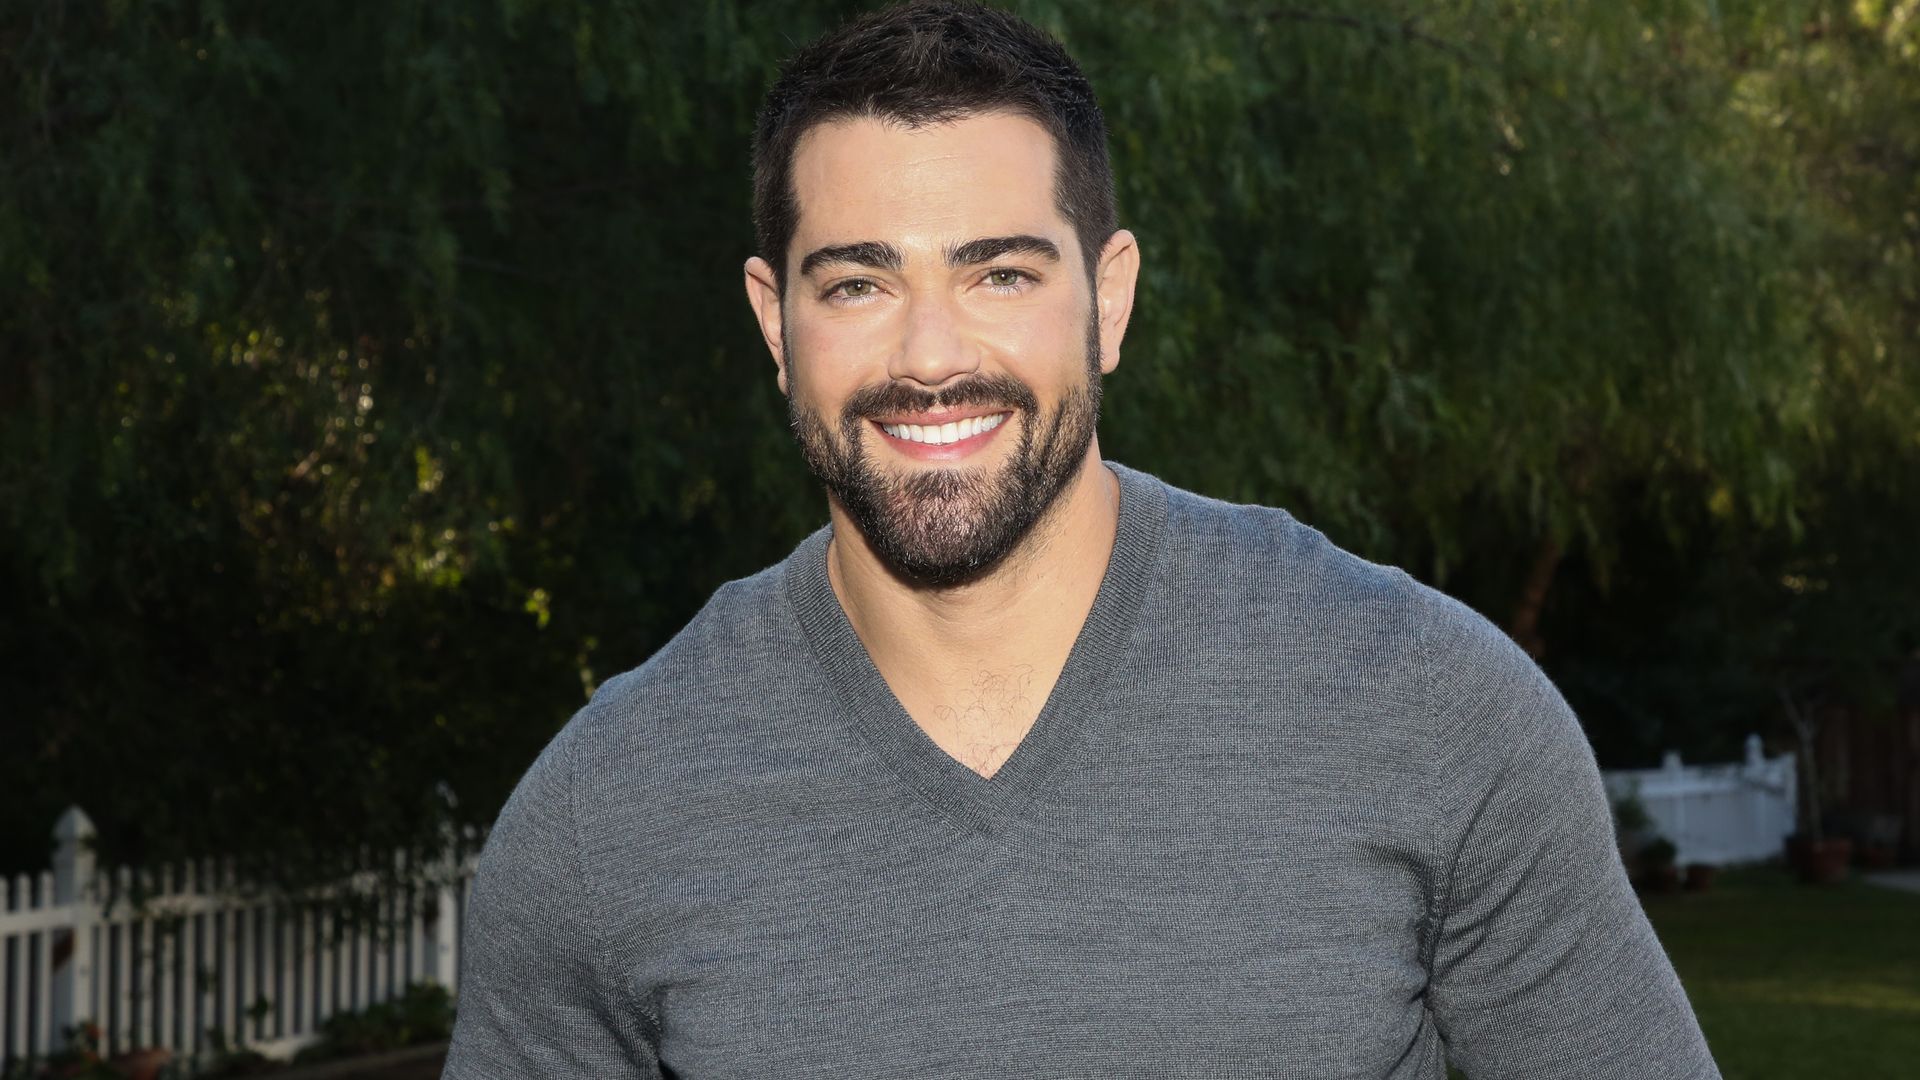 UNIVERSAL CITY, CALIFORNIA - JANUARY 08: Actor Jesse Metcalfe visits Hallmark Channel's "Home & Family" at Universal Studios Hollywood on January 08, 2020 in Universal City, California. (Photo by Paul Archuleta/Getty Images)